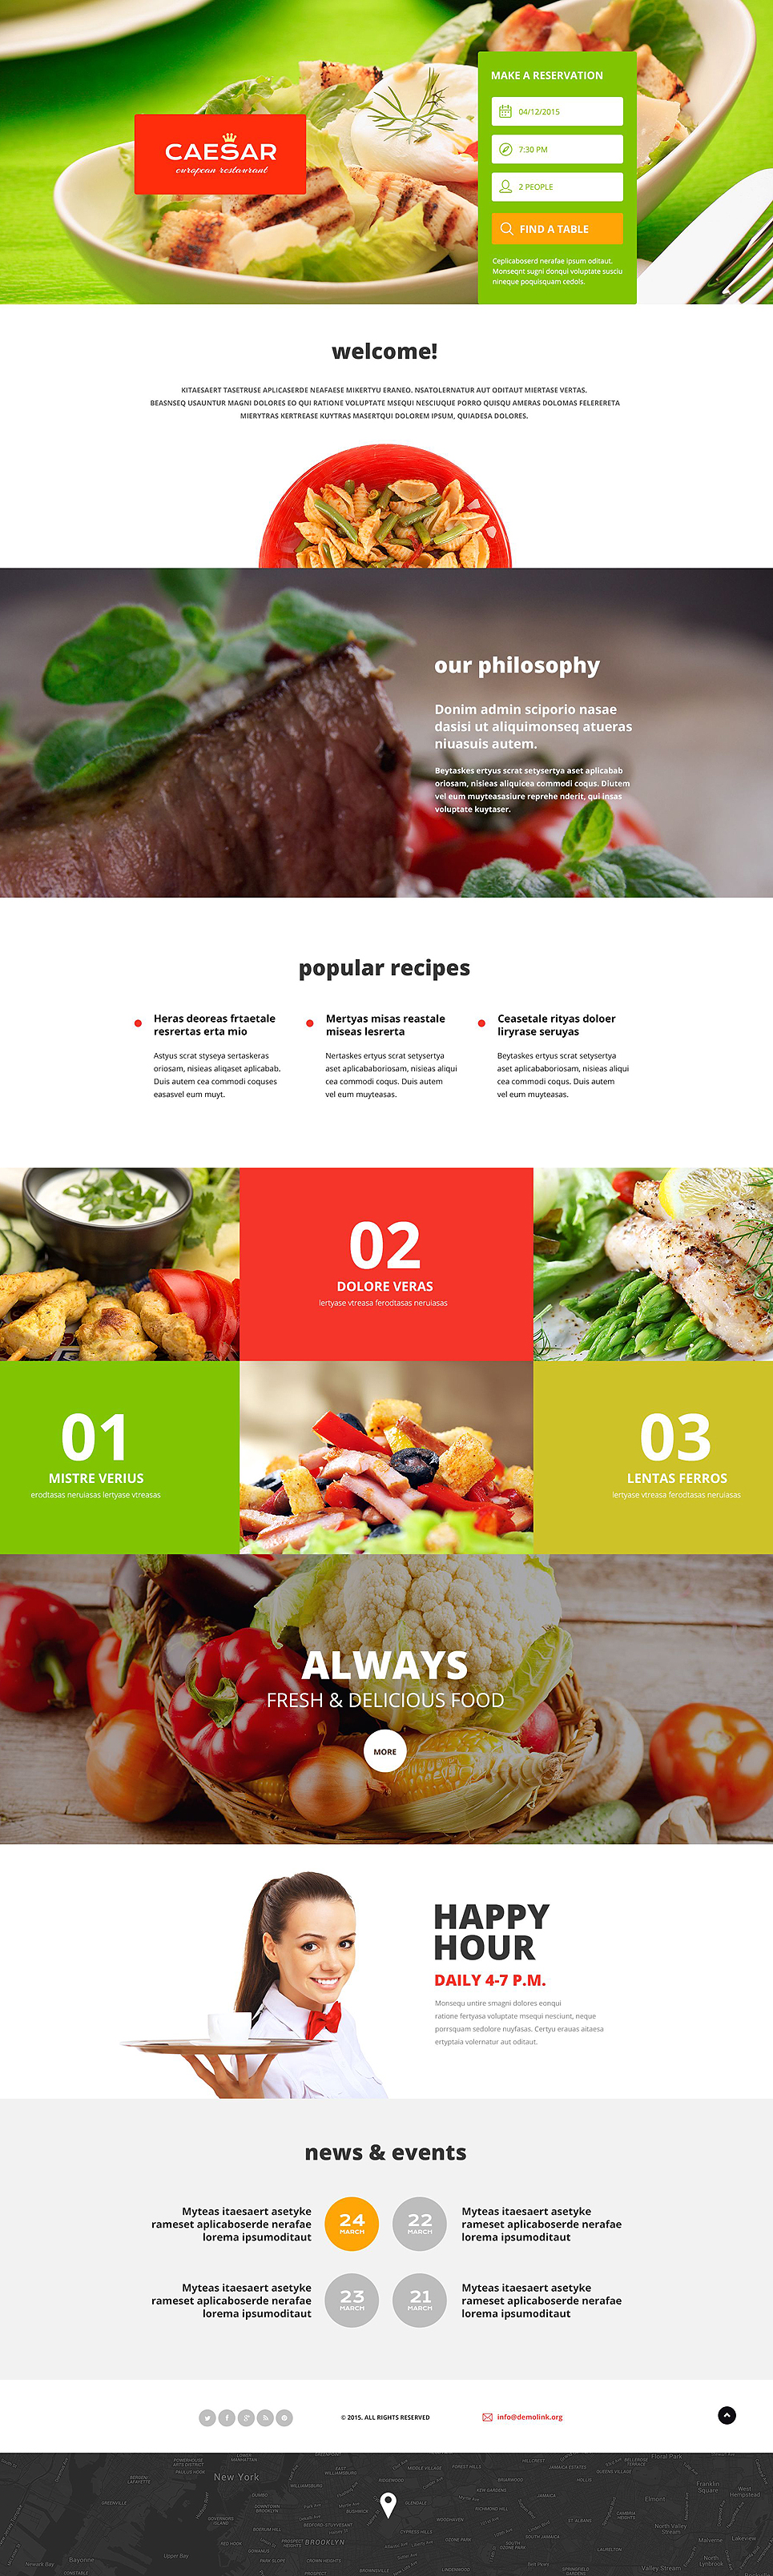 Cafe and Restaurant Responsive Landing Page Template New Screenshots BIG